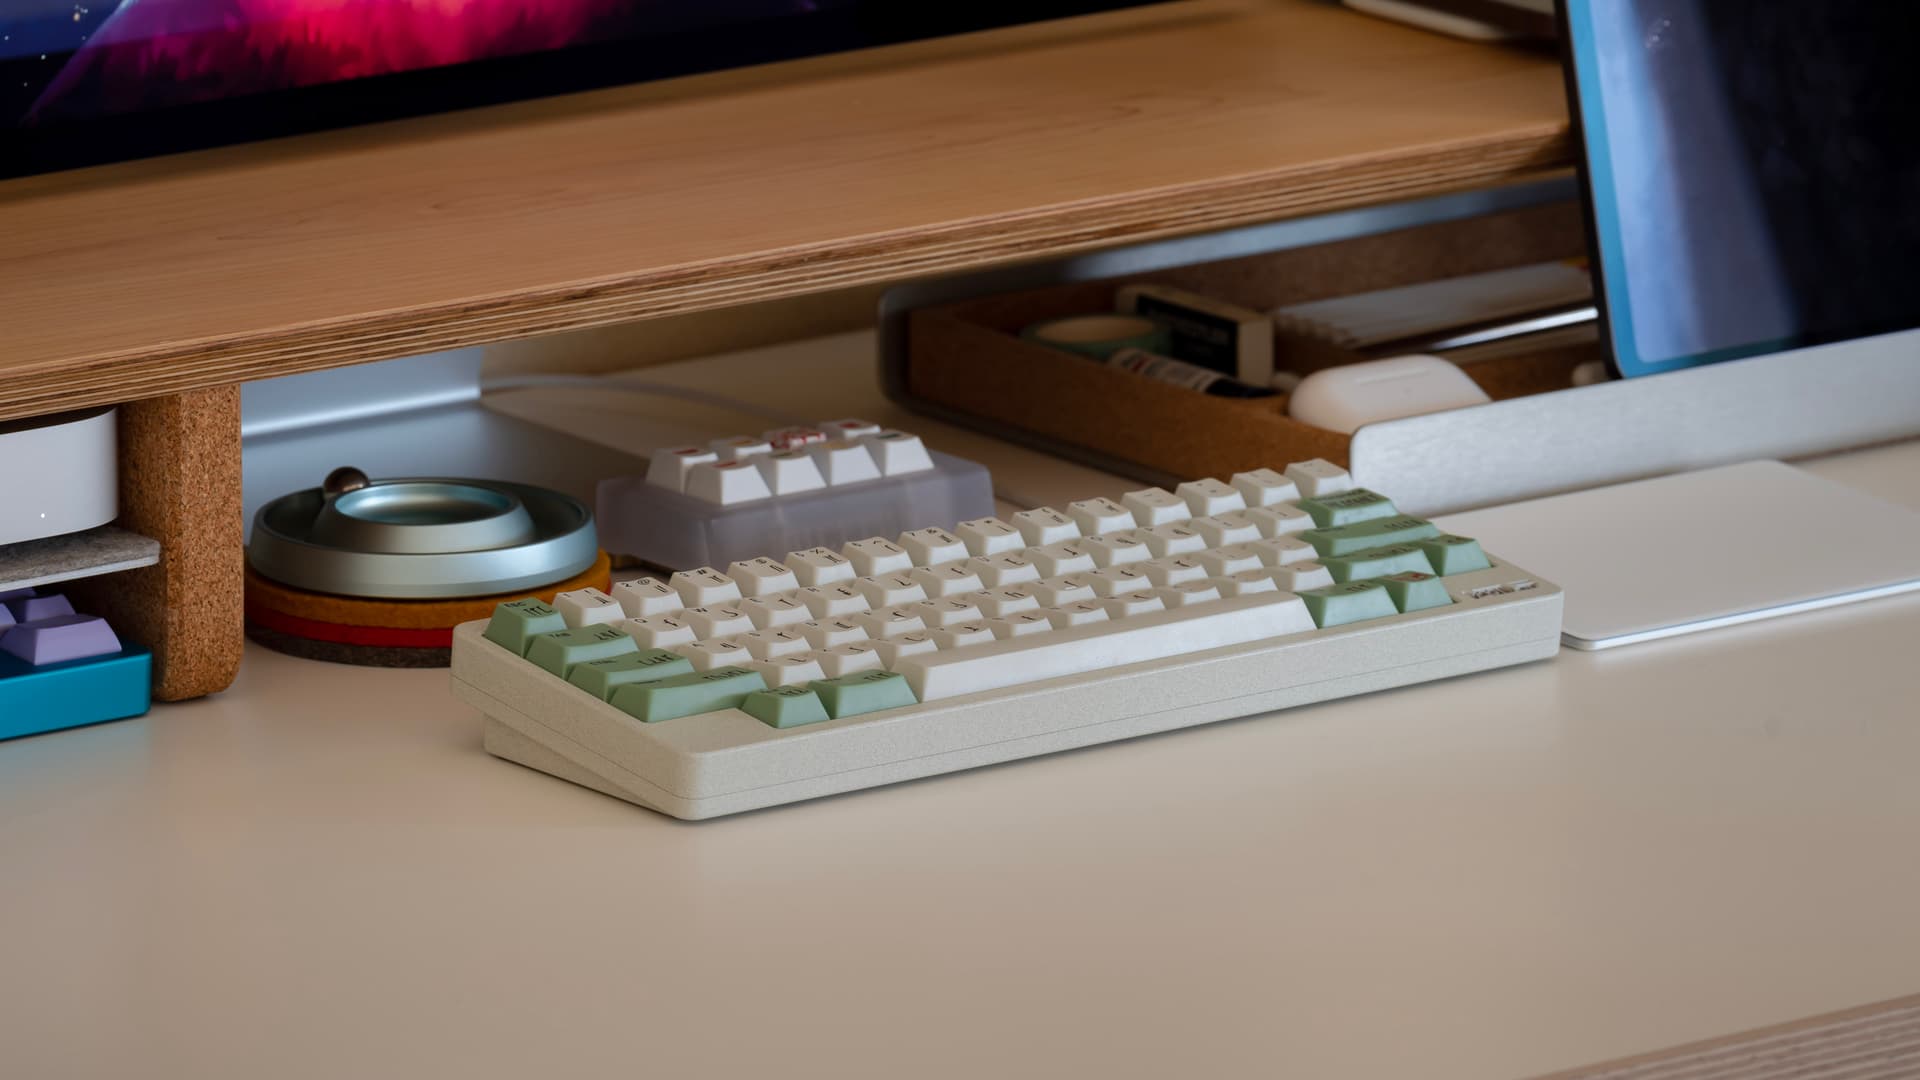 Cleanest way to route a keyboard cable on your desk? - Learning and ...